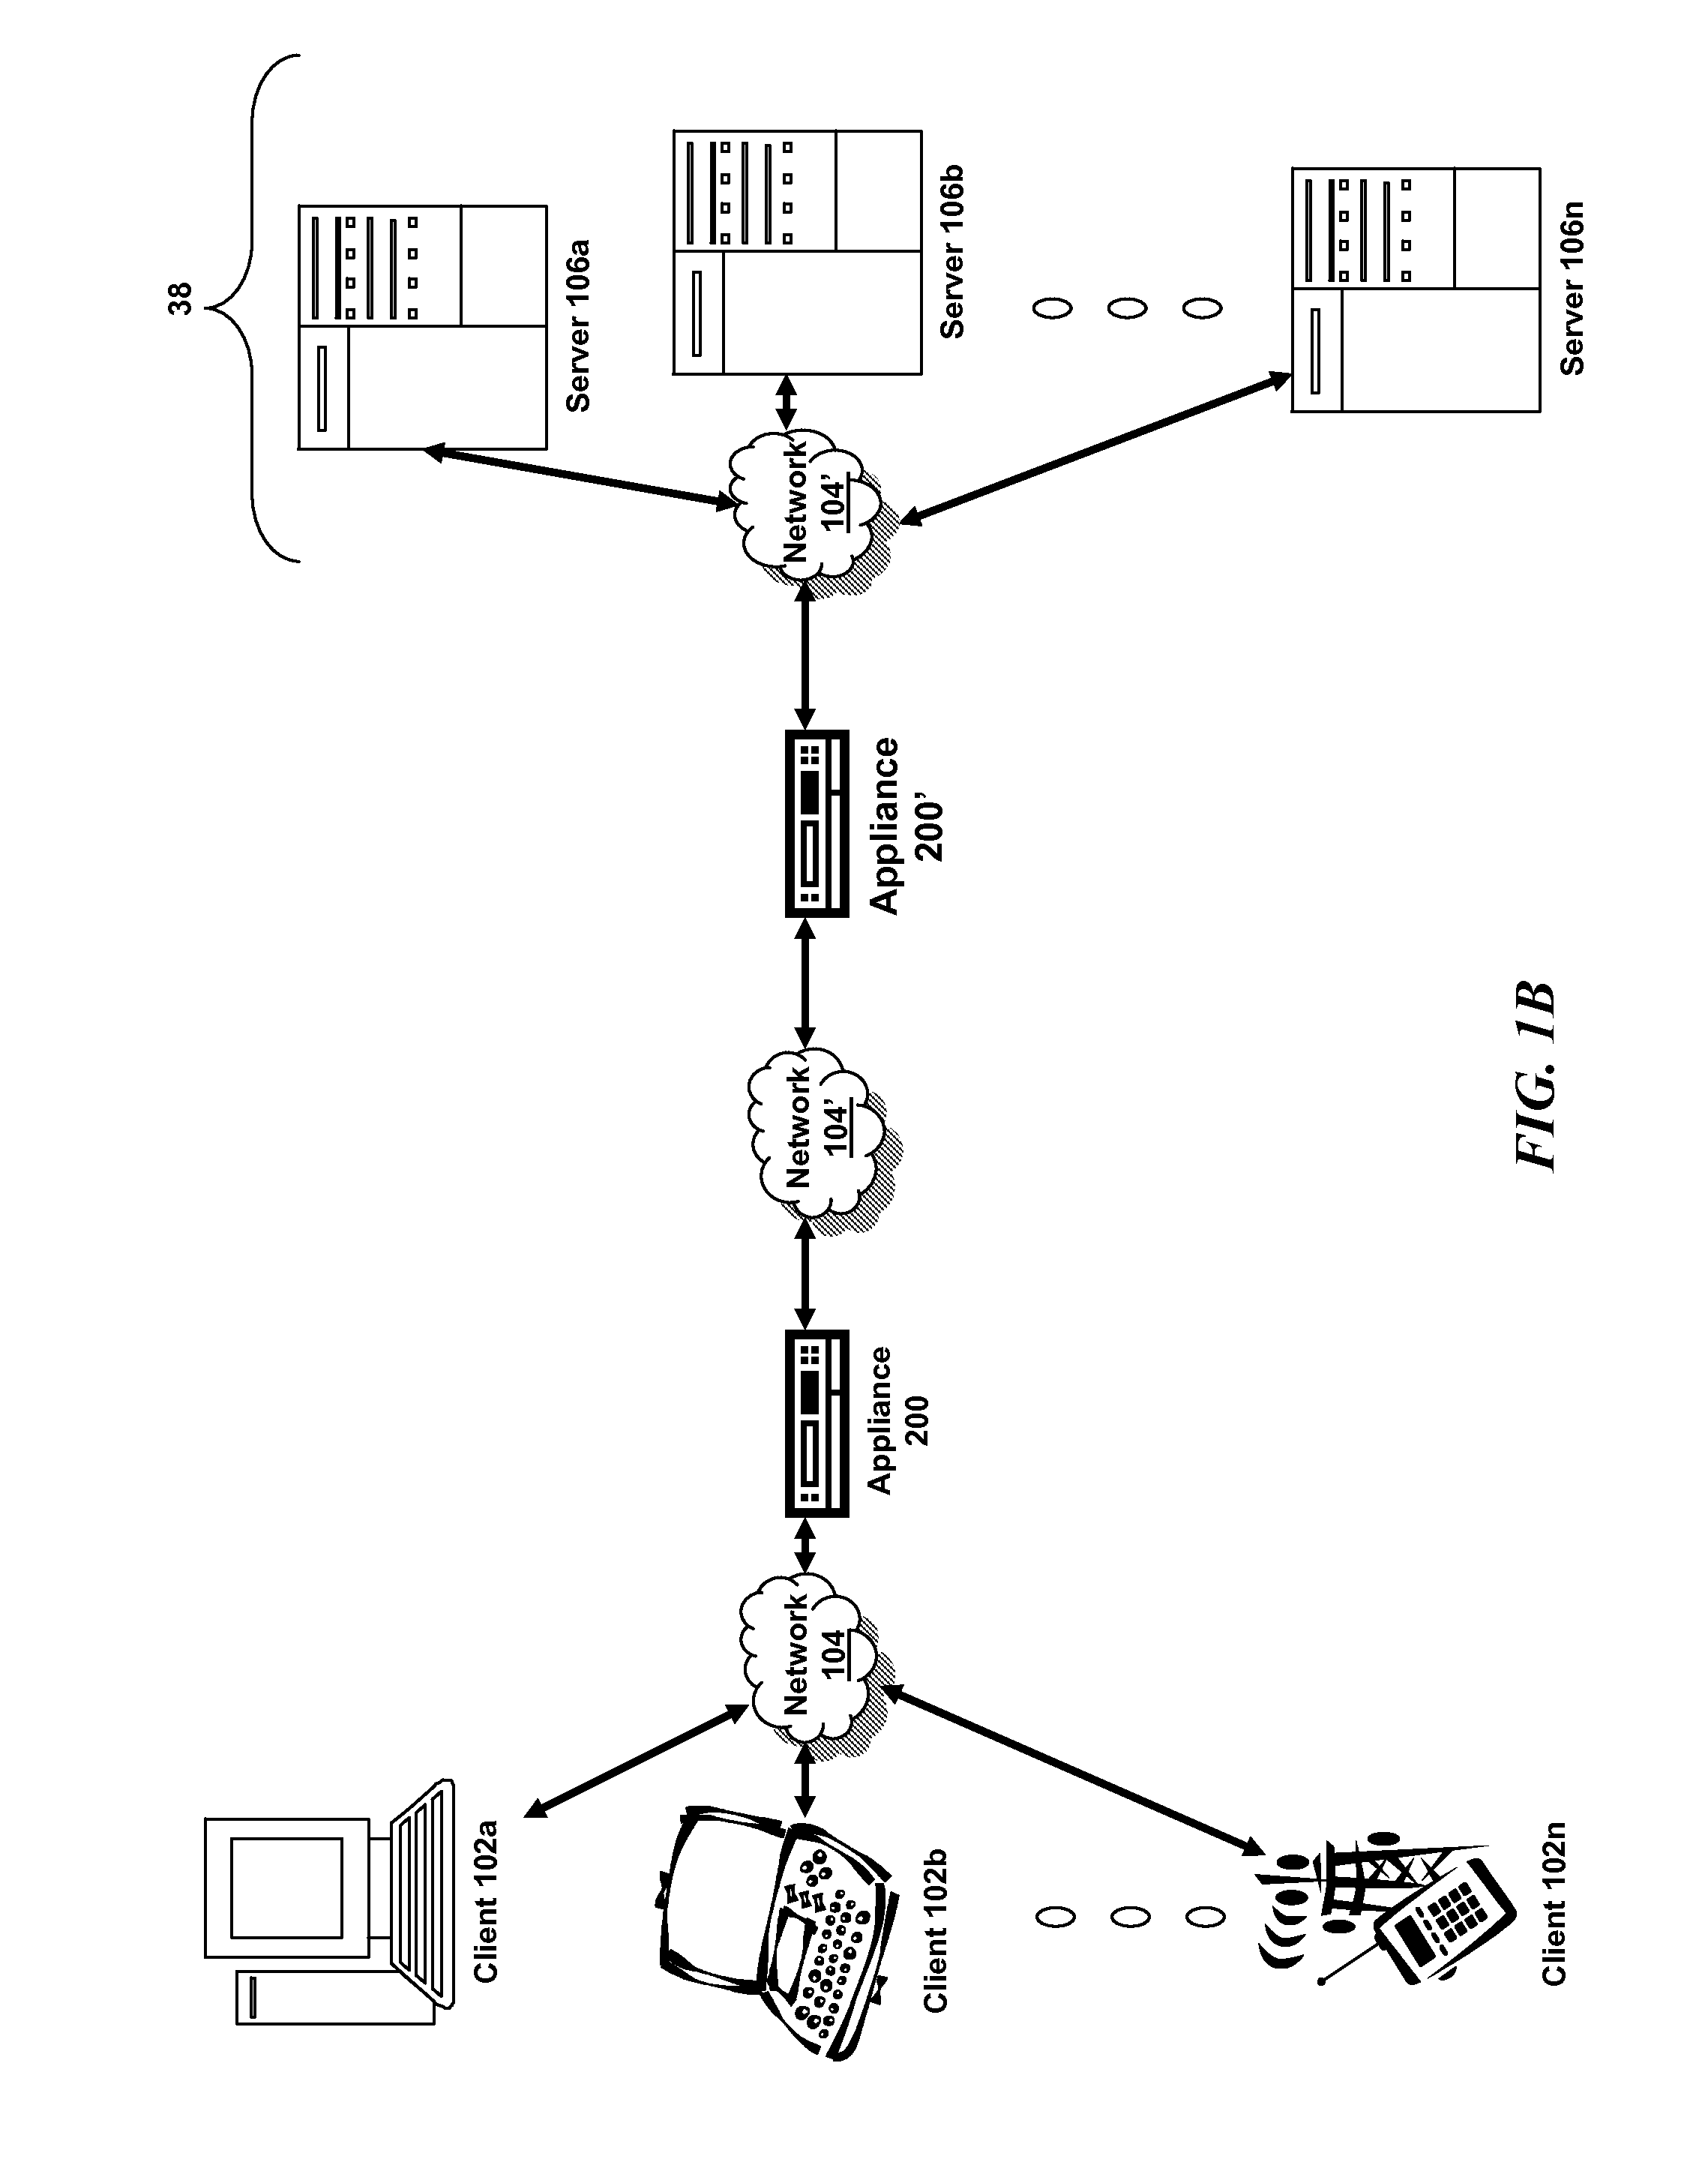 Systems and methods for managing large cache services in a multi-core system